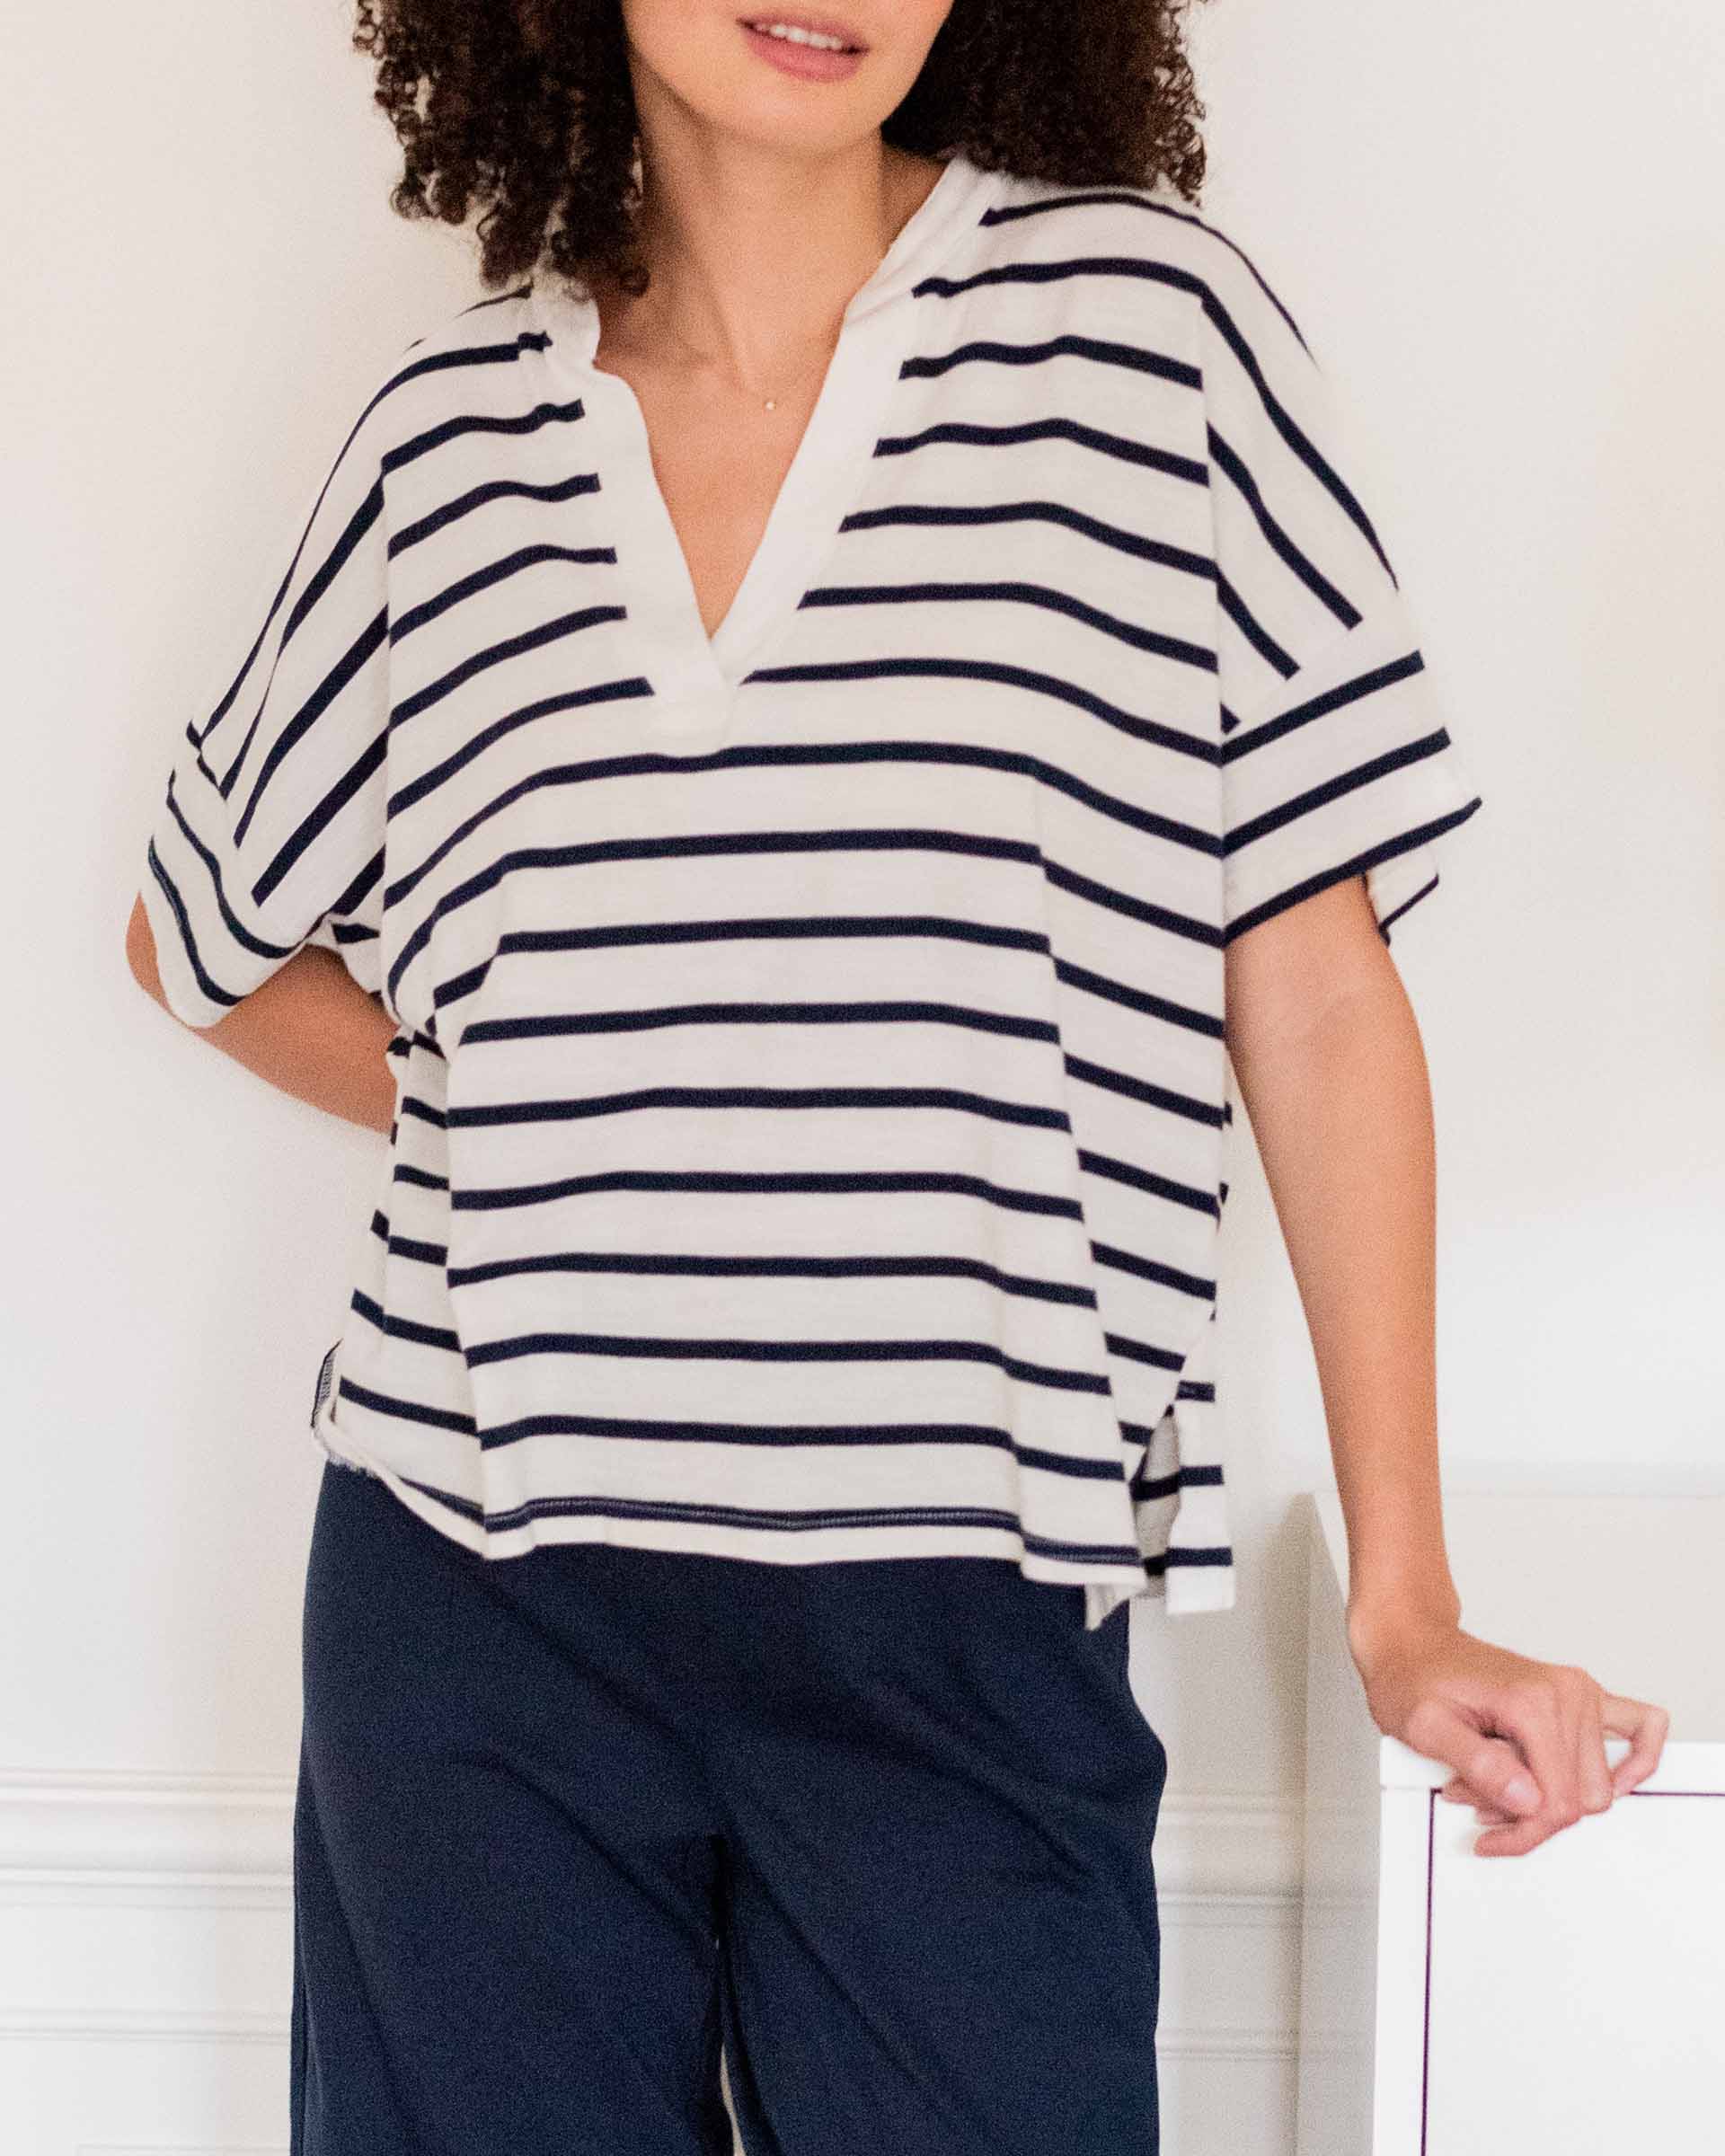 Women's One Size Navy Striped Short Sleeve Tee with Two Pockets on Chest Front View